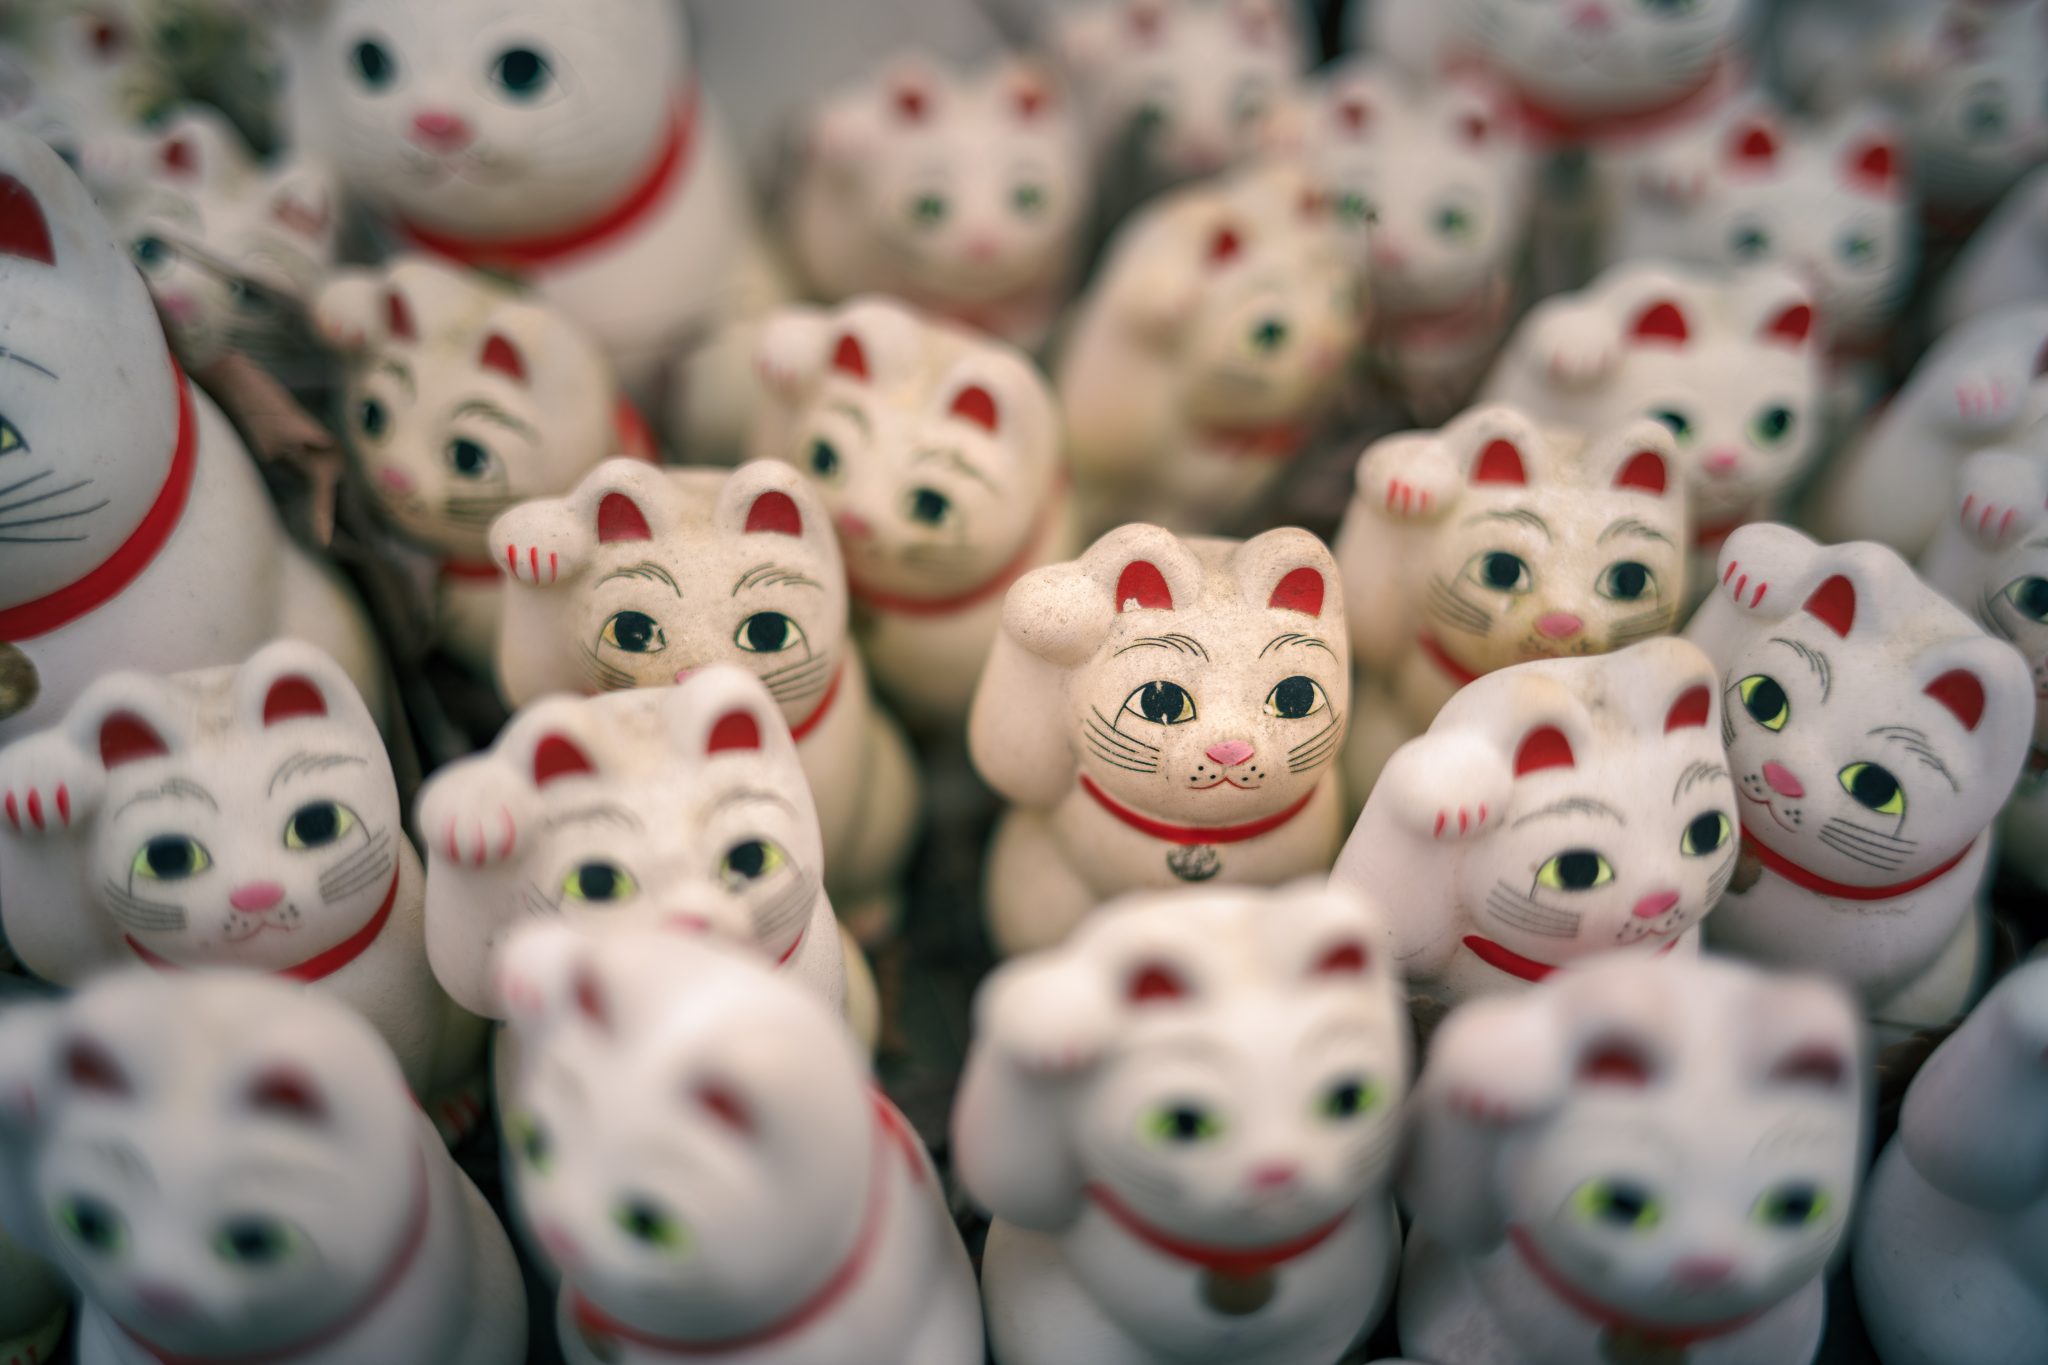 Photo shows a lot of Maneki-neko (beckoning cat), with one in particular standing out in the photograph. This beckoning cats also look like salarymen riding the train. These cats, with one paw raised, are known to bring good luck & prosperity.